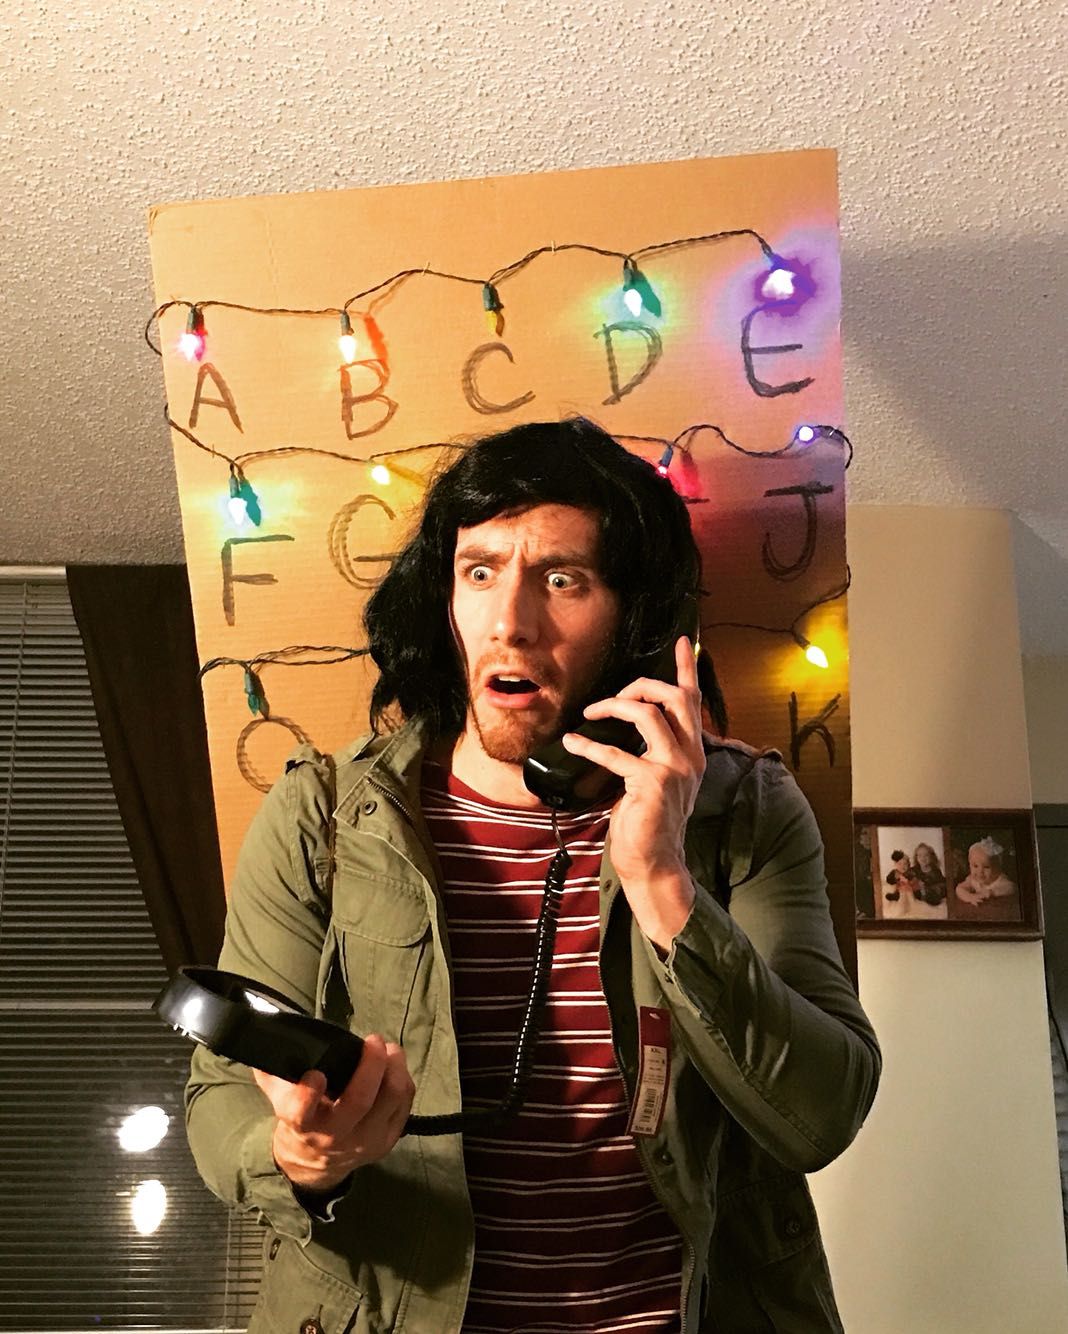 Going as Stranger Things' Joyce Byers for Halloween - nailed it!